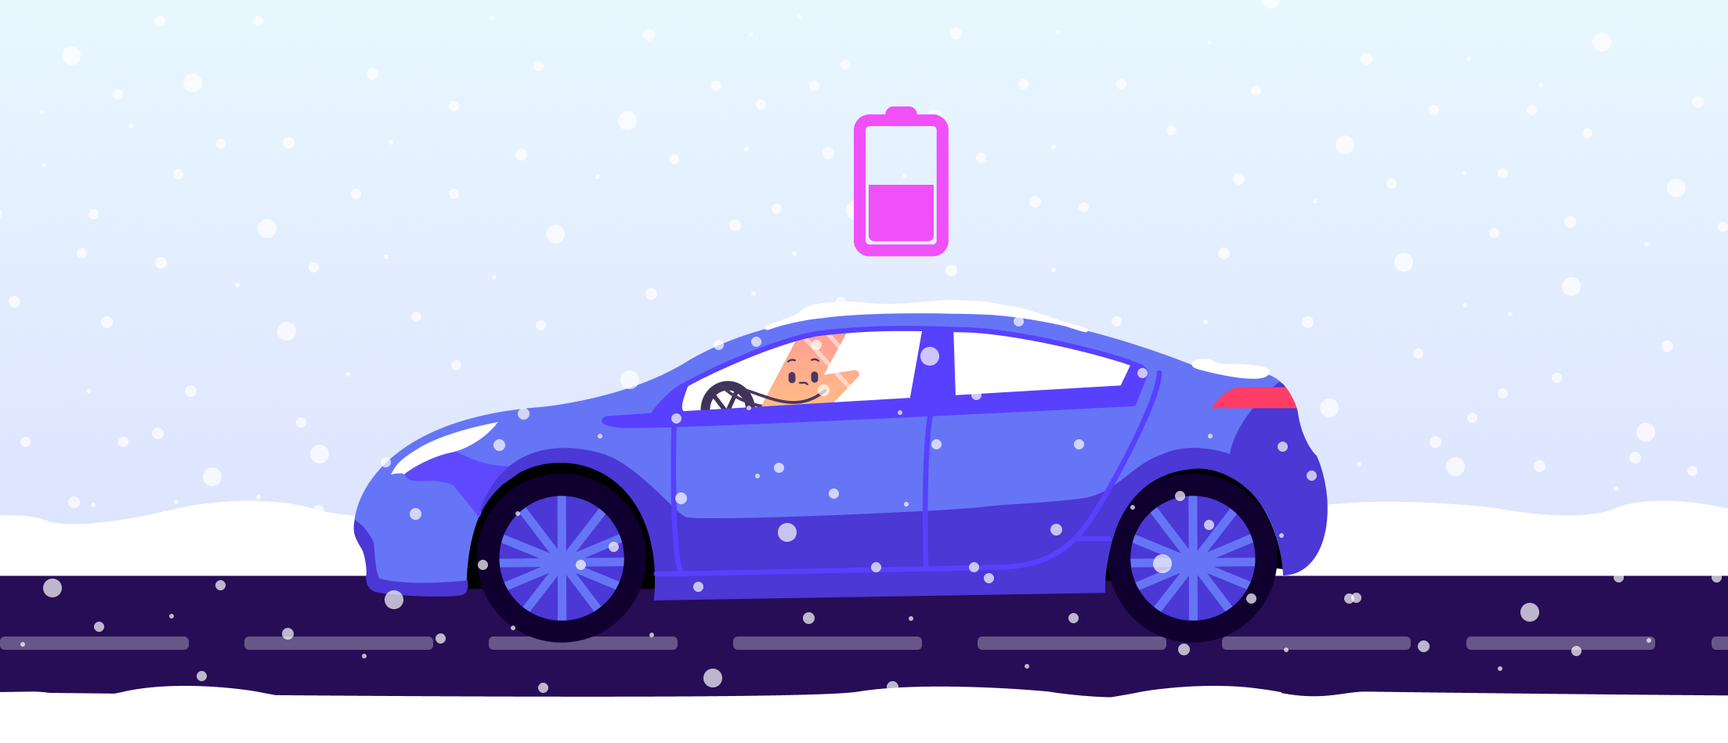 Image shows Zapman, the Electric Universe mascot, driving an electric car in the winter